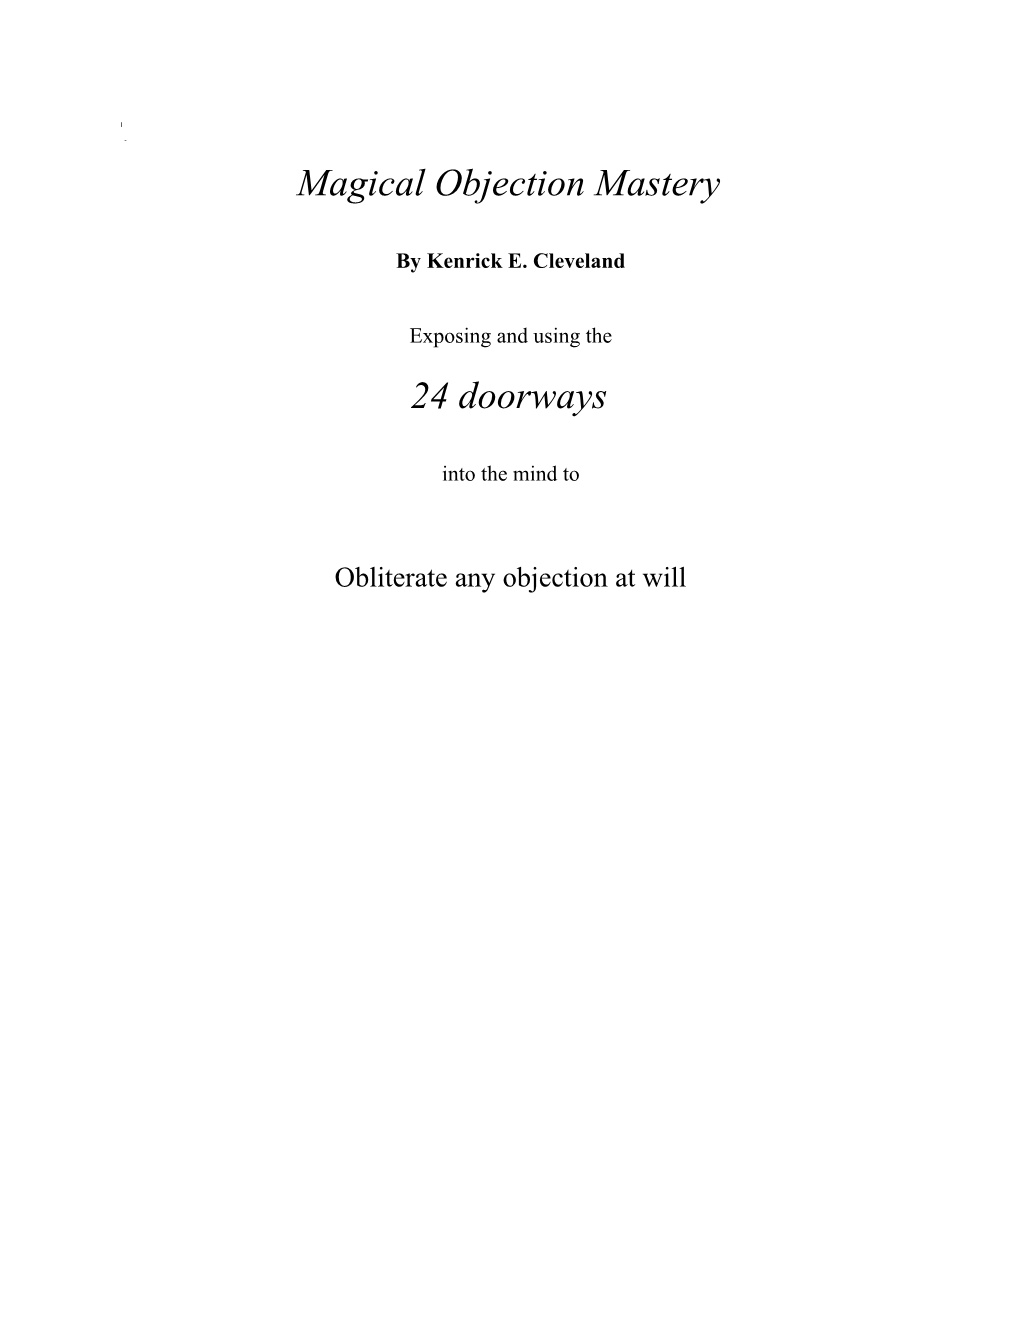 Magical Objection Mastery Manual